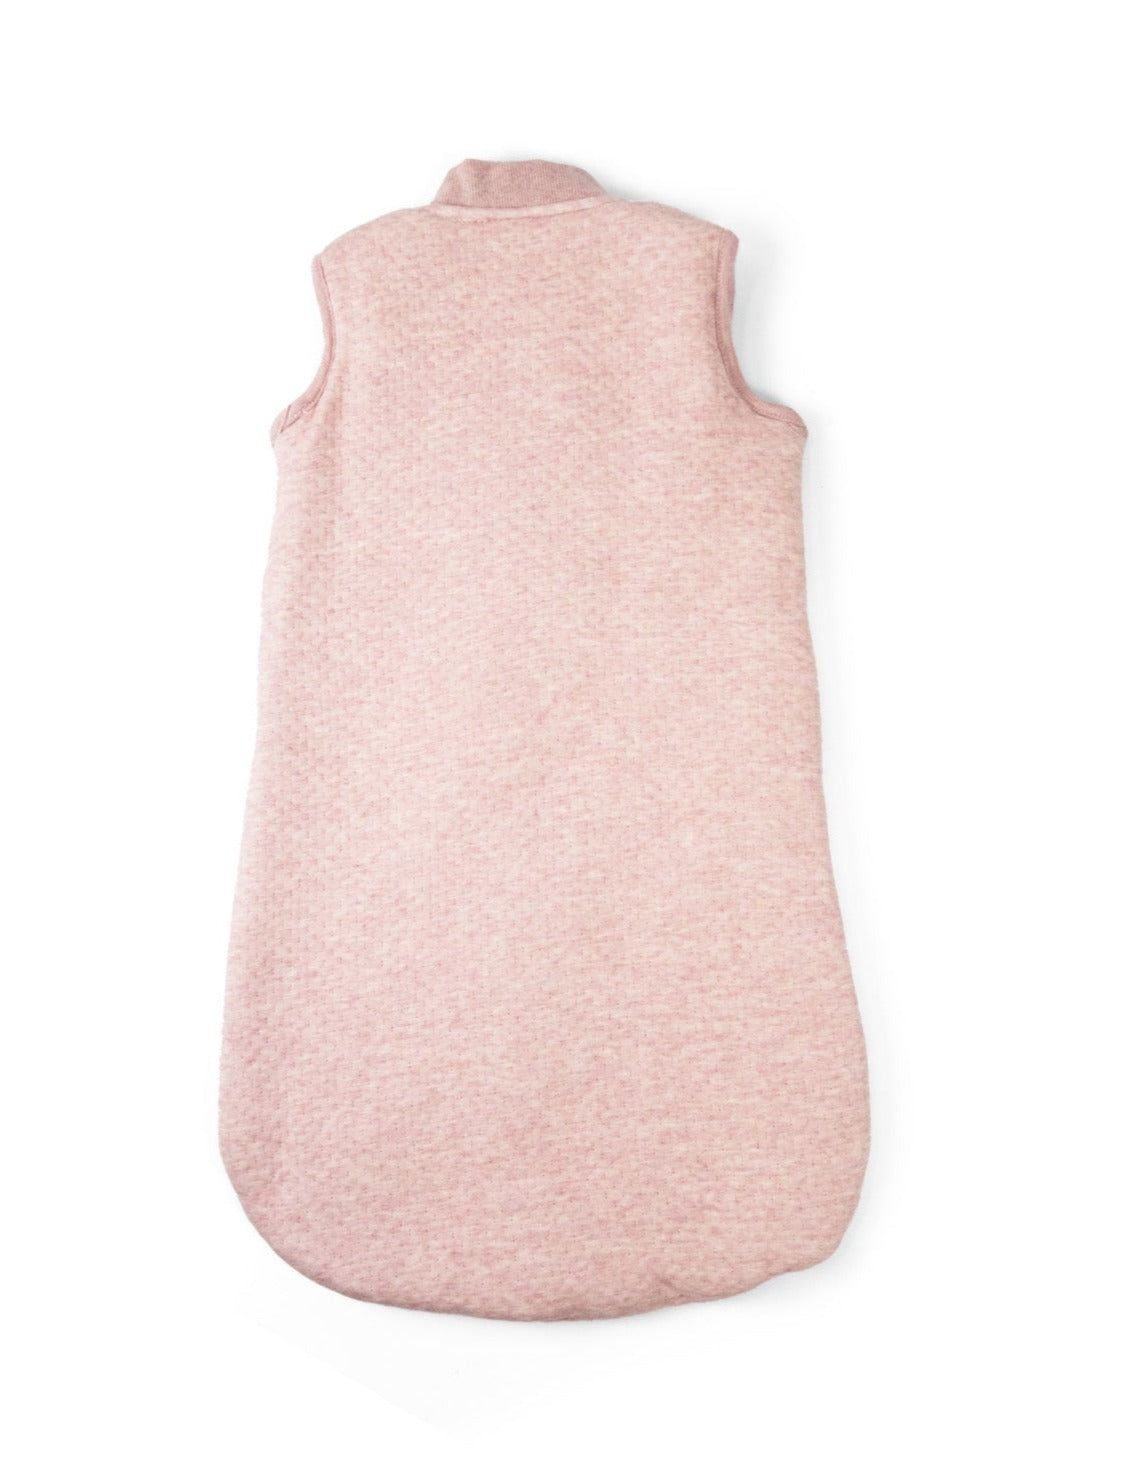 sleeveless sleeping bag in dusty pink cotton - 2.5 TOG